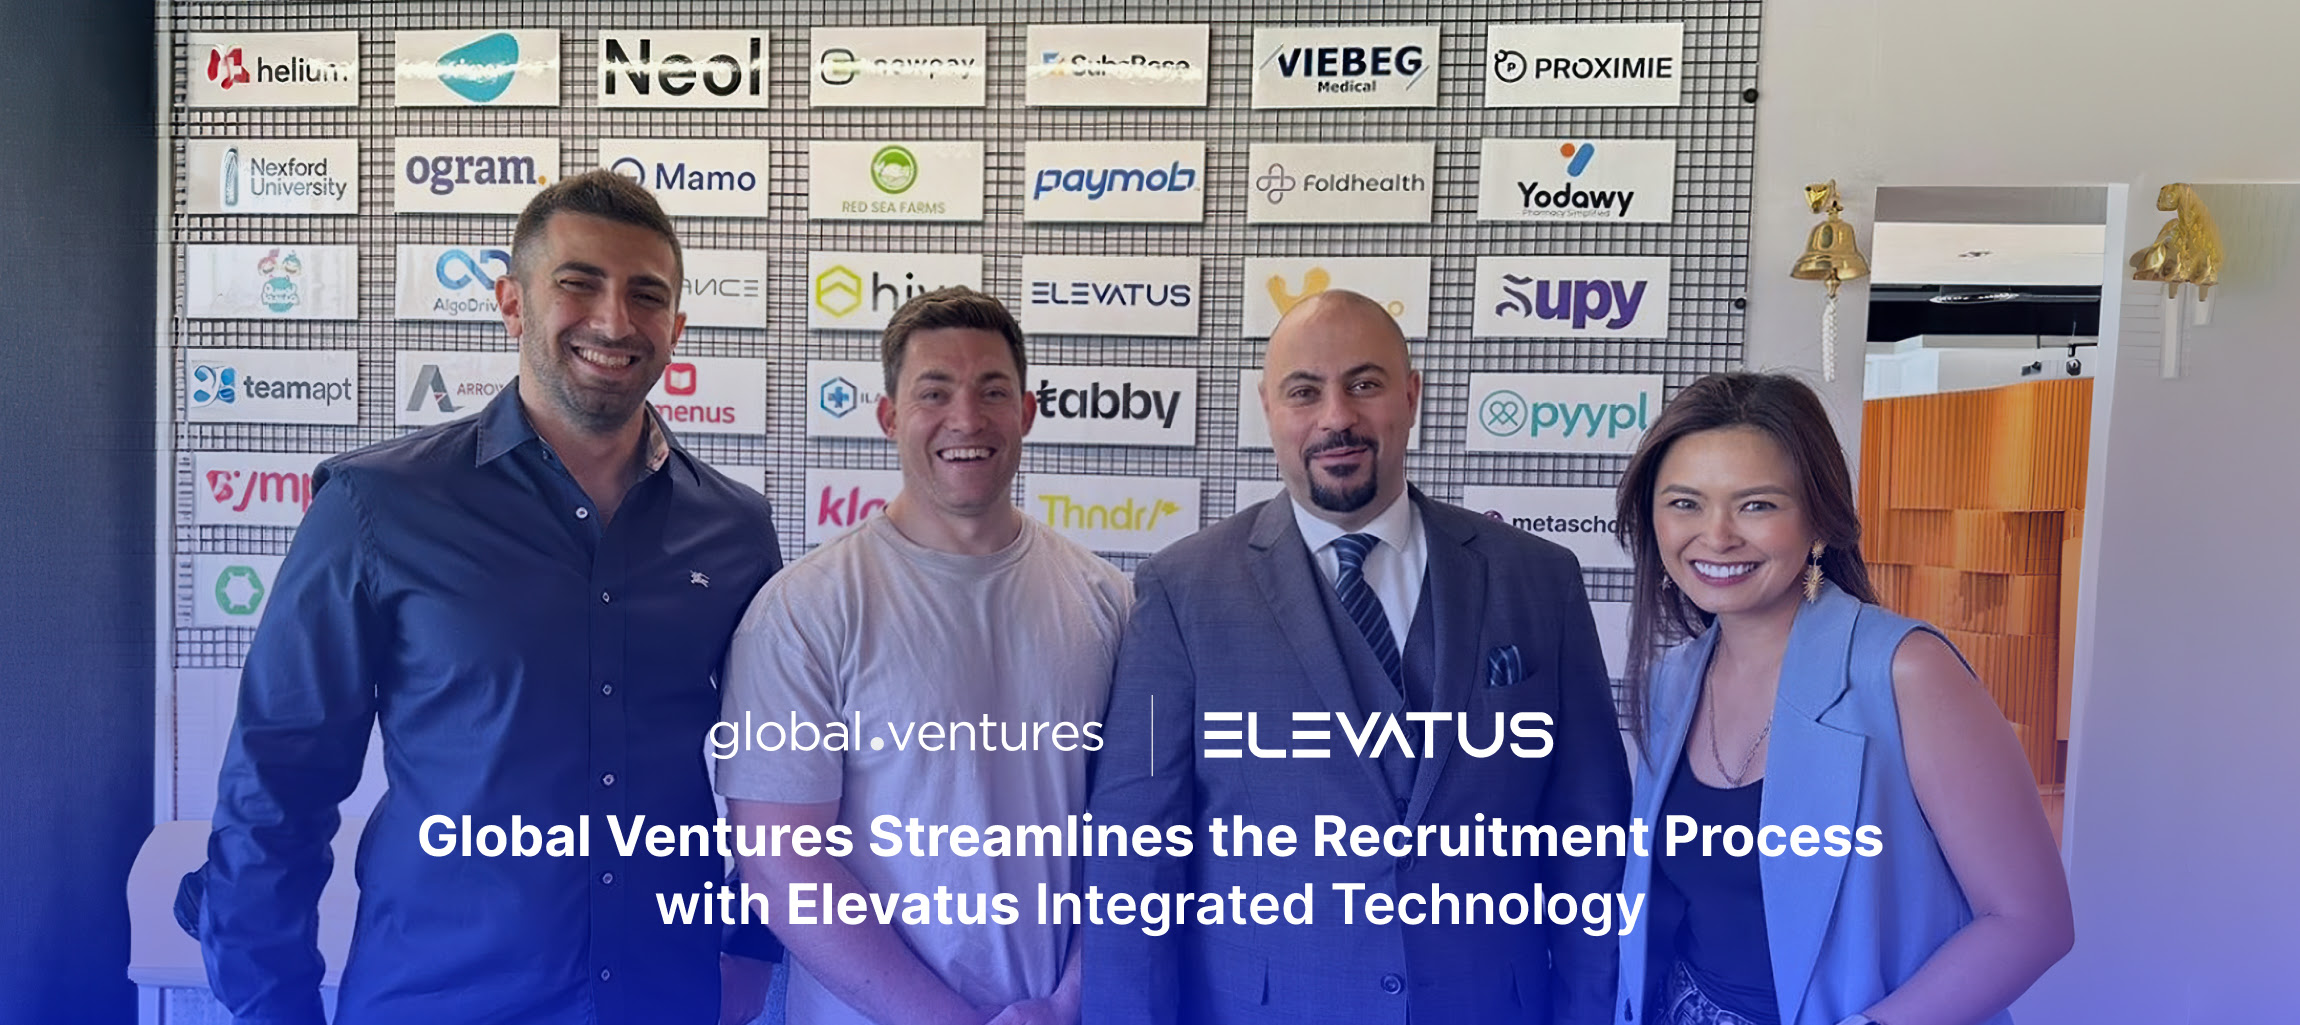 Elevatus Inc: Global Ventures Streamlines The Recruitment Process With Elevatus’ Integrated Technology